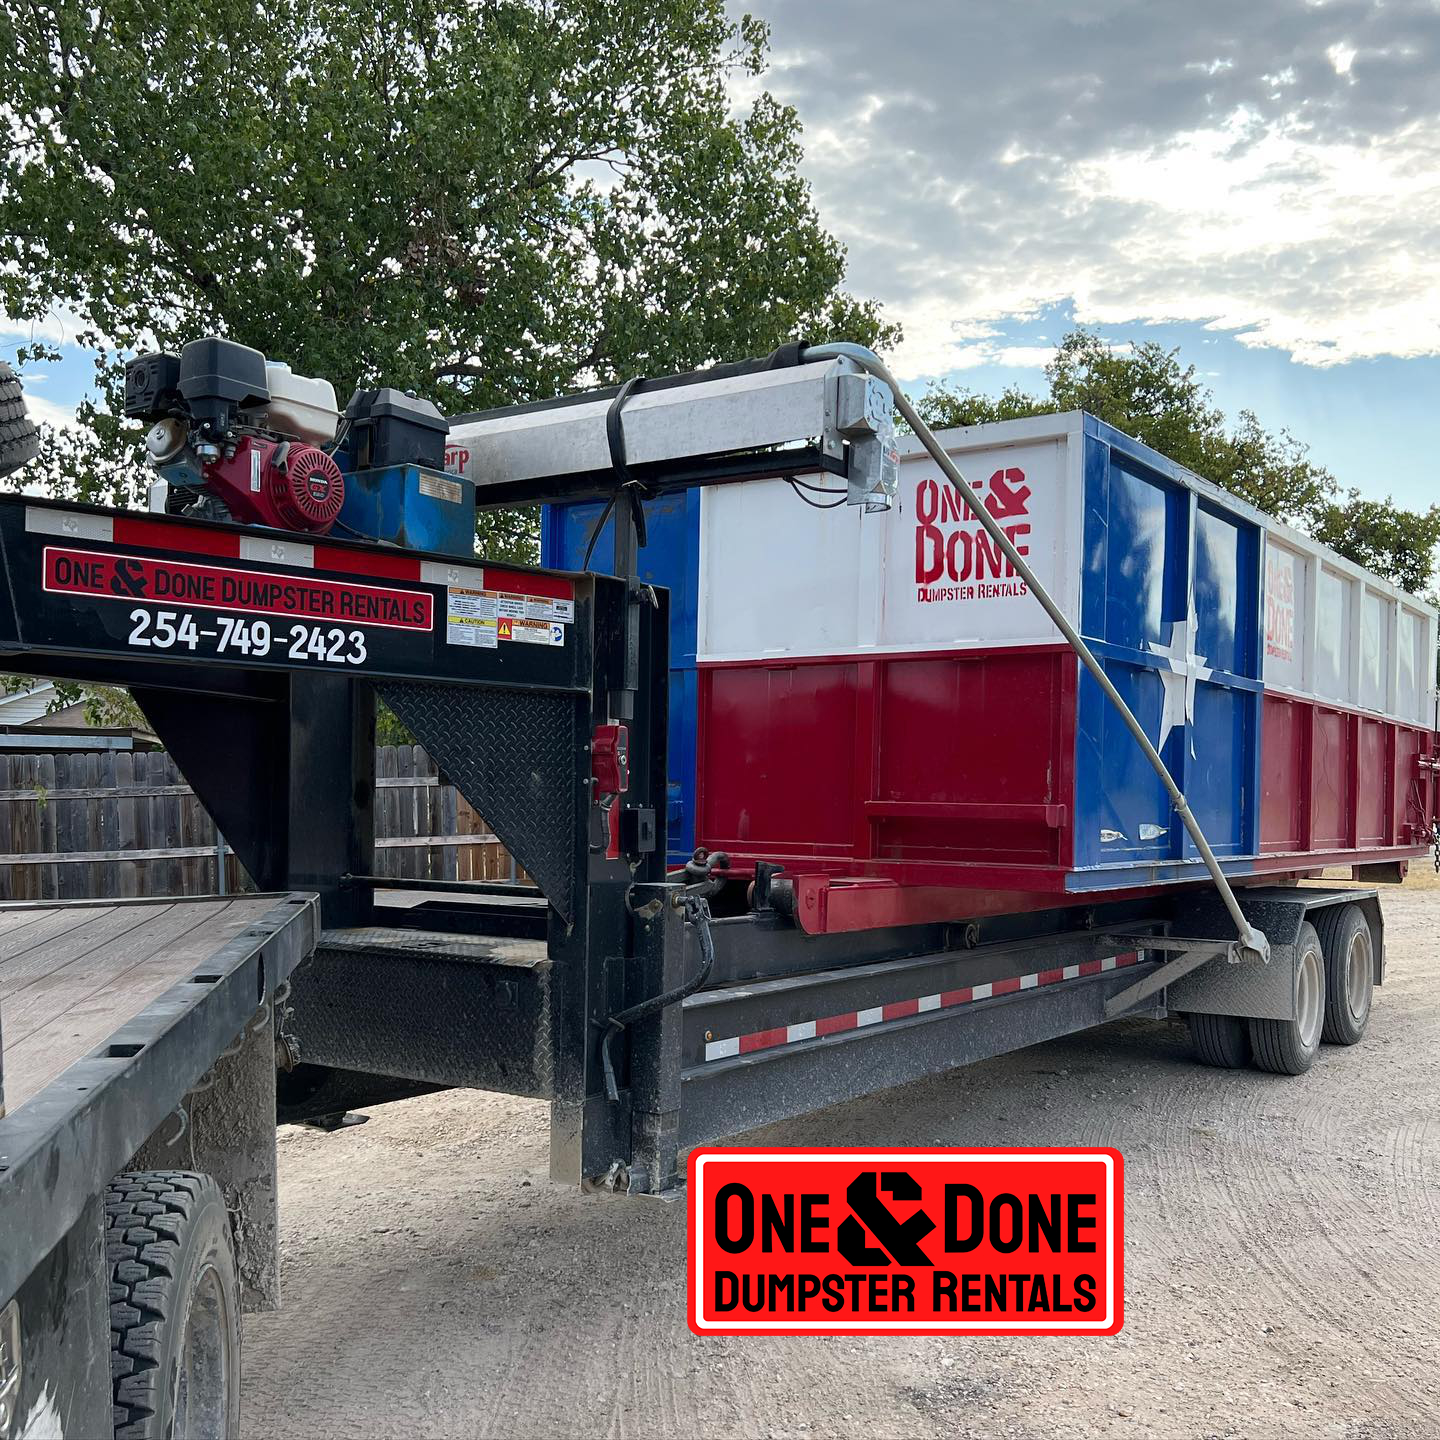 Small Dumpster Rental One and Done Dumpster Rentals Hillsboro TX Homeowners Use for Yard Waste